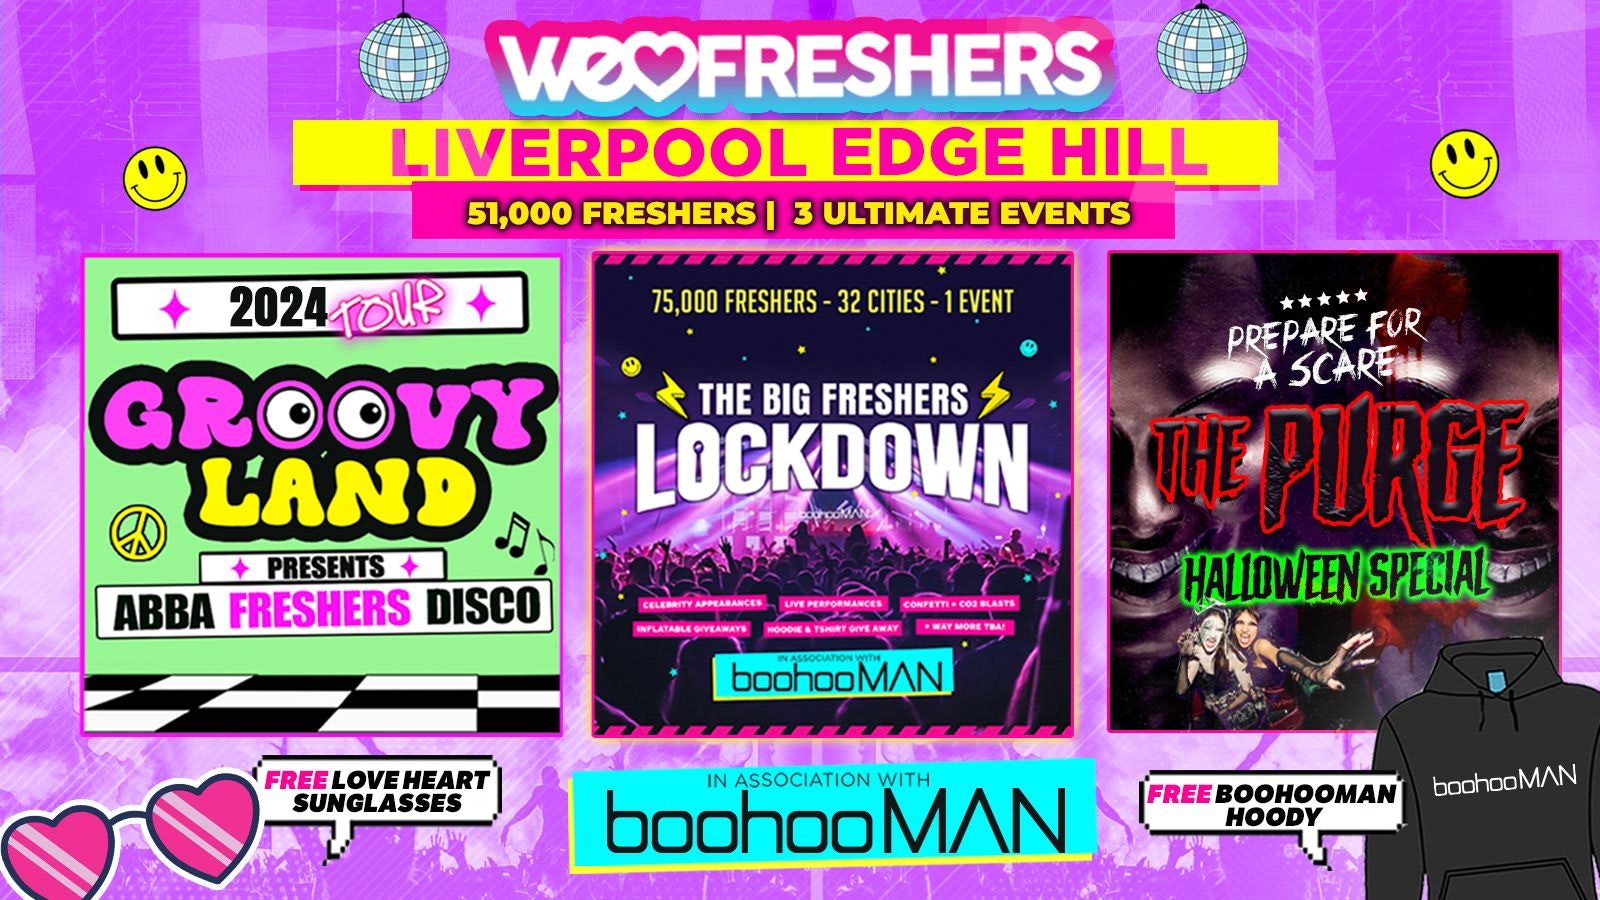 WE LOVE EDGE HILL UNI FRESHERS 2024 in association with boohooMAN ❗FREE BOOHOOMAN HOODY TODAY ONLY❗